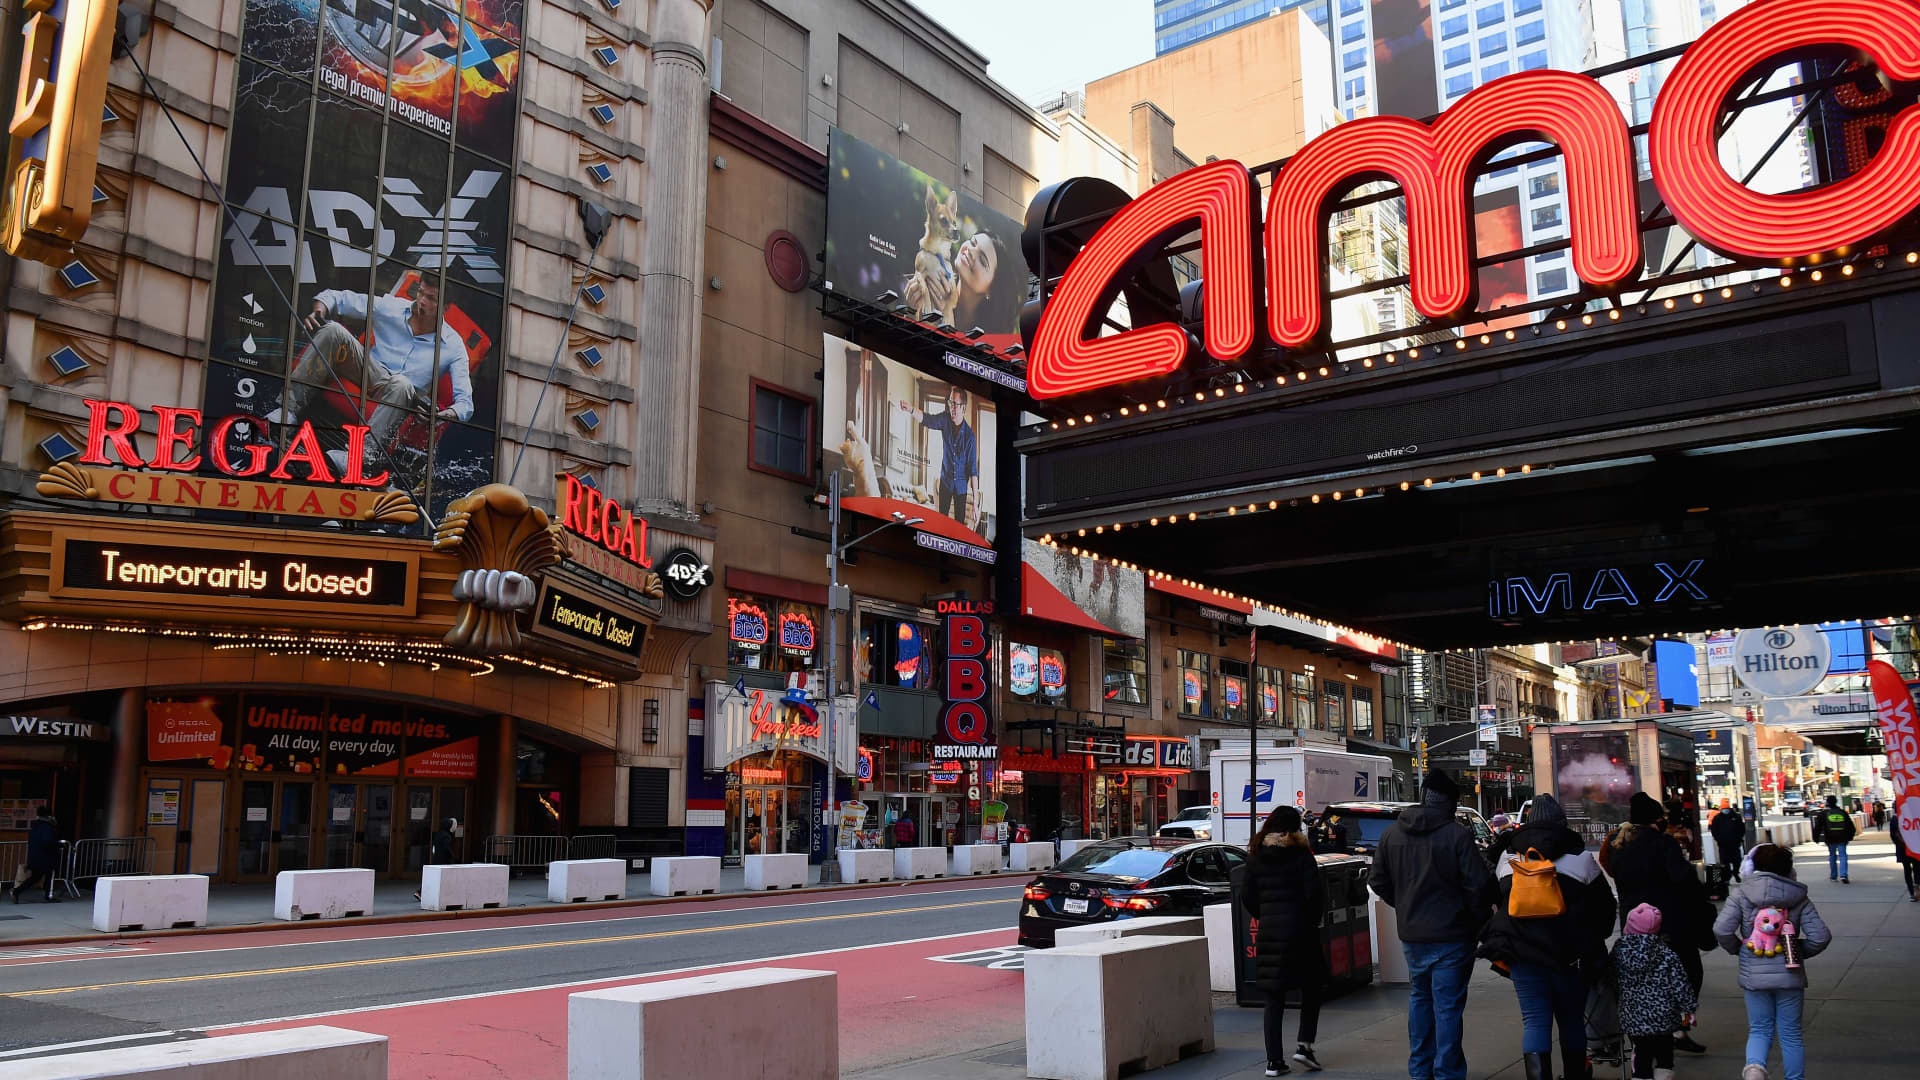 The AMC Empire 25 near Times Square is open as New York City's cinemas reopen for the first time in a year following the coronavirus shutdown, on March 5, 2021.